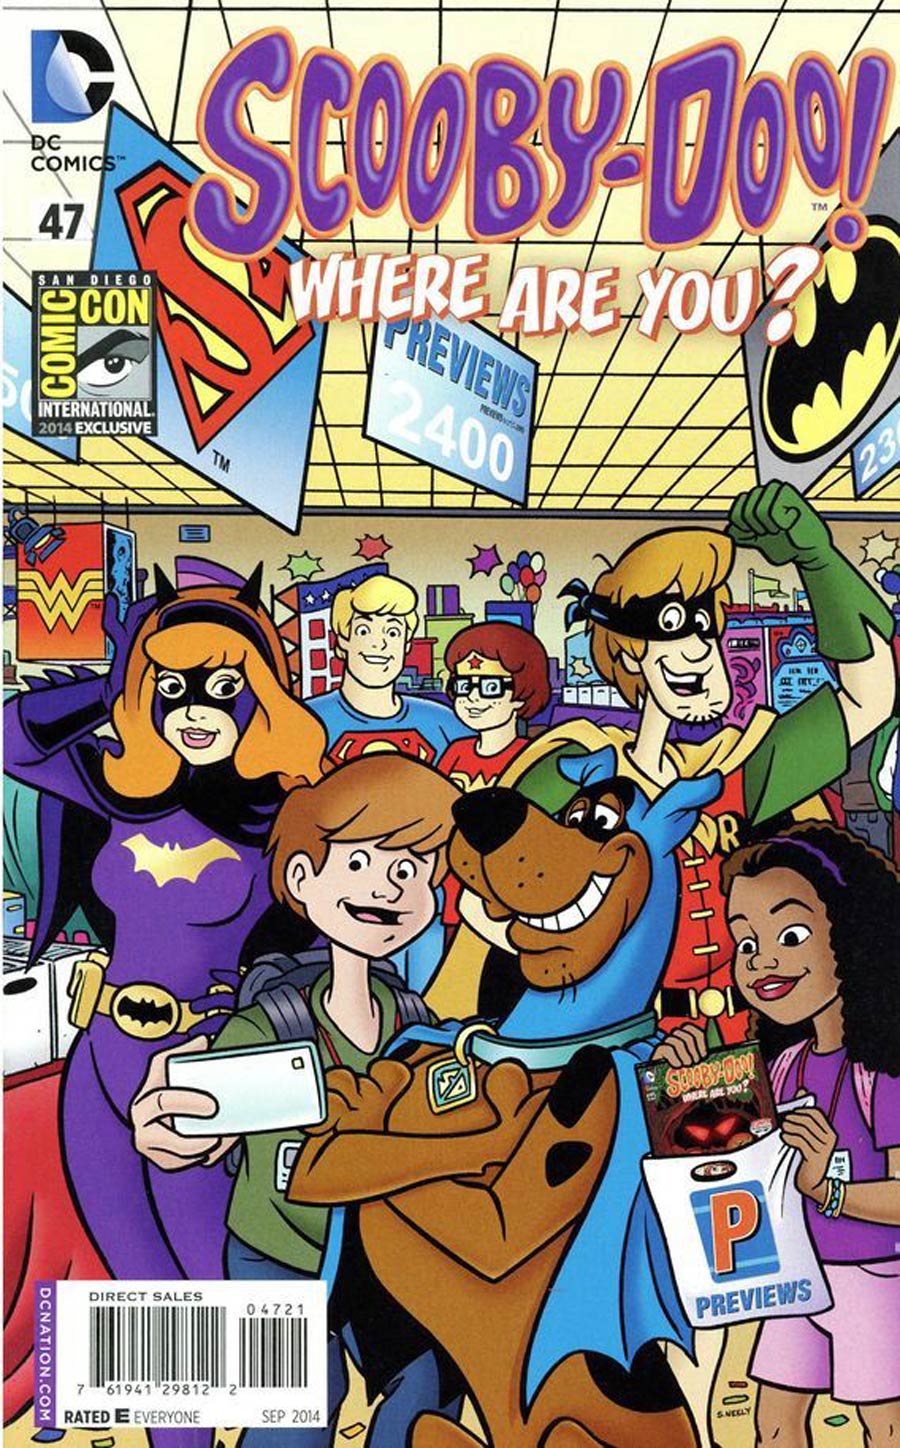 Scooby-Doo Where Are You #47 Cover B Variant SDCC 2014 Exclusive Cover